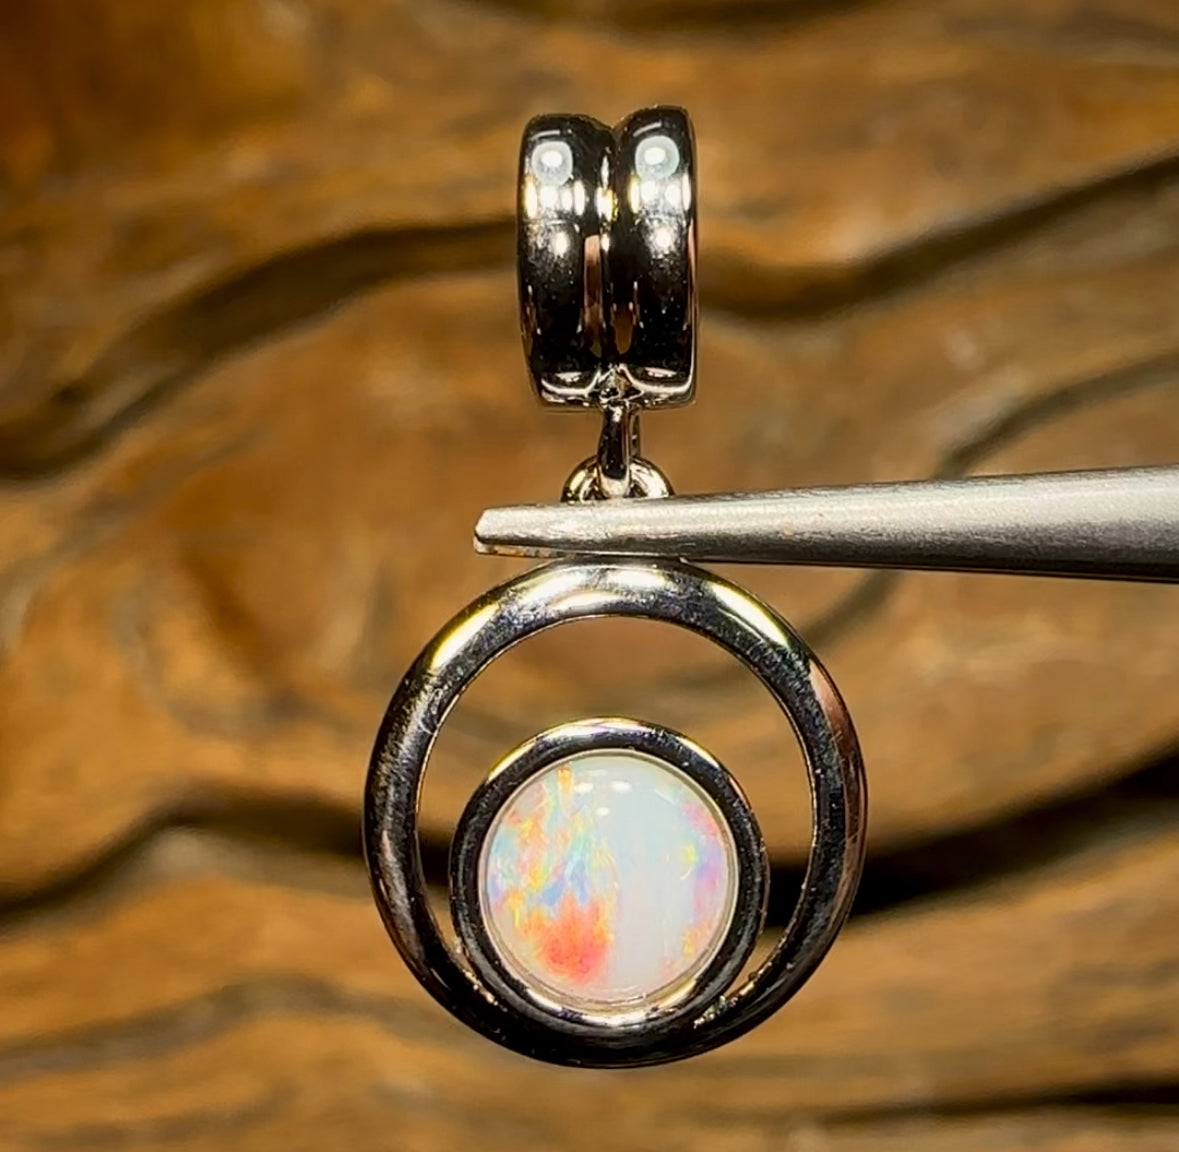 St. Silver - Solid Opal Pendant / pandora style charm - Opal Whisperers